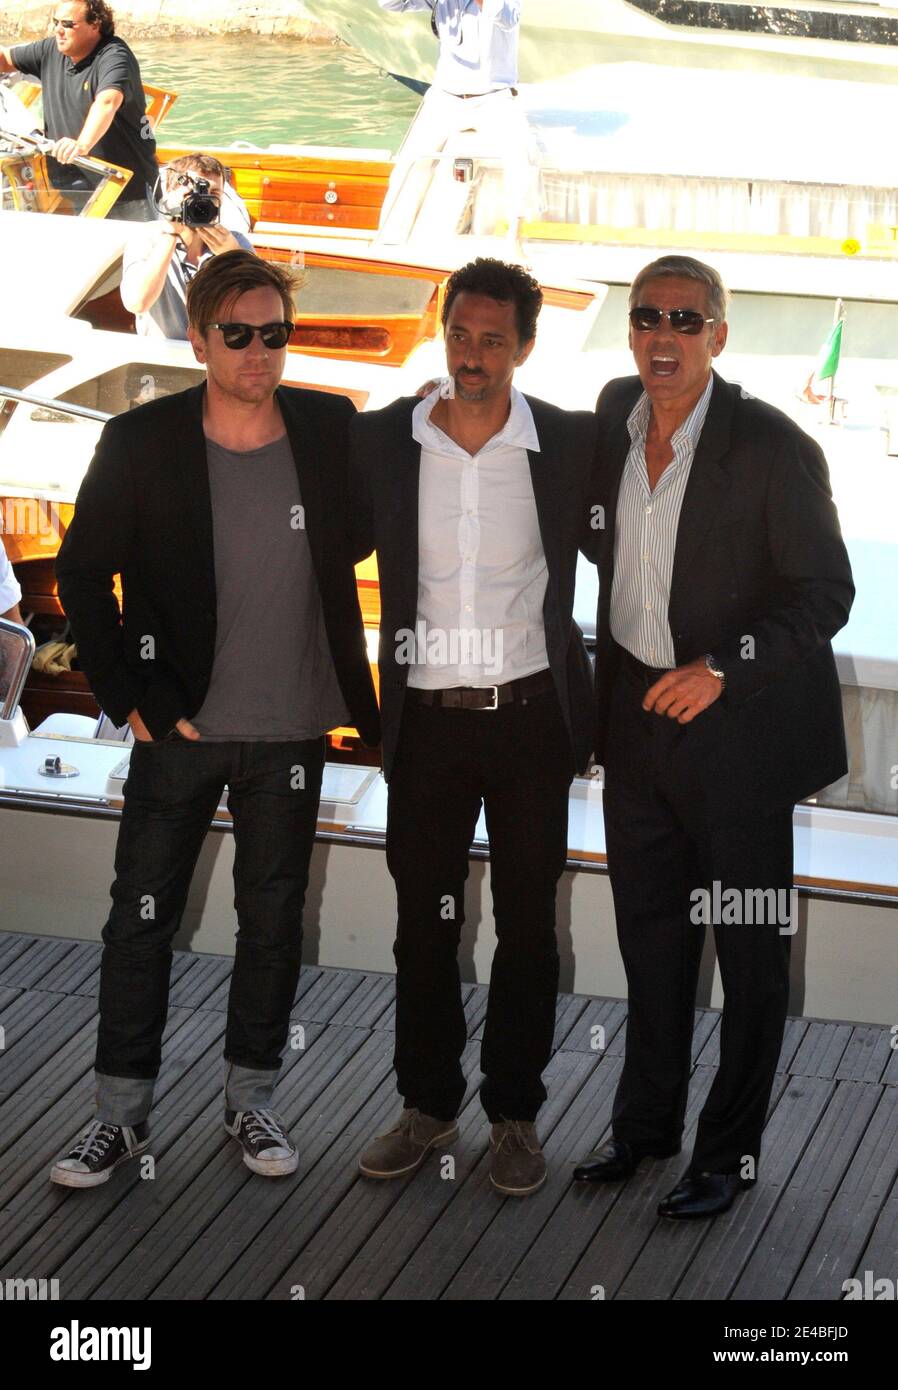 Actors Ewan McGregor, director Grant Heslov, and George Clooney arrive at the Palazzo del Casino for the 66th Venice Film Festival in Venice, Italy on September 8, 2009. Photo by ABACAPRESS.COM Stock Photo